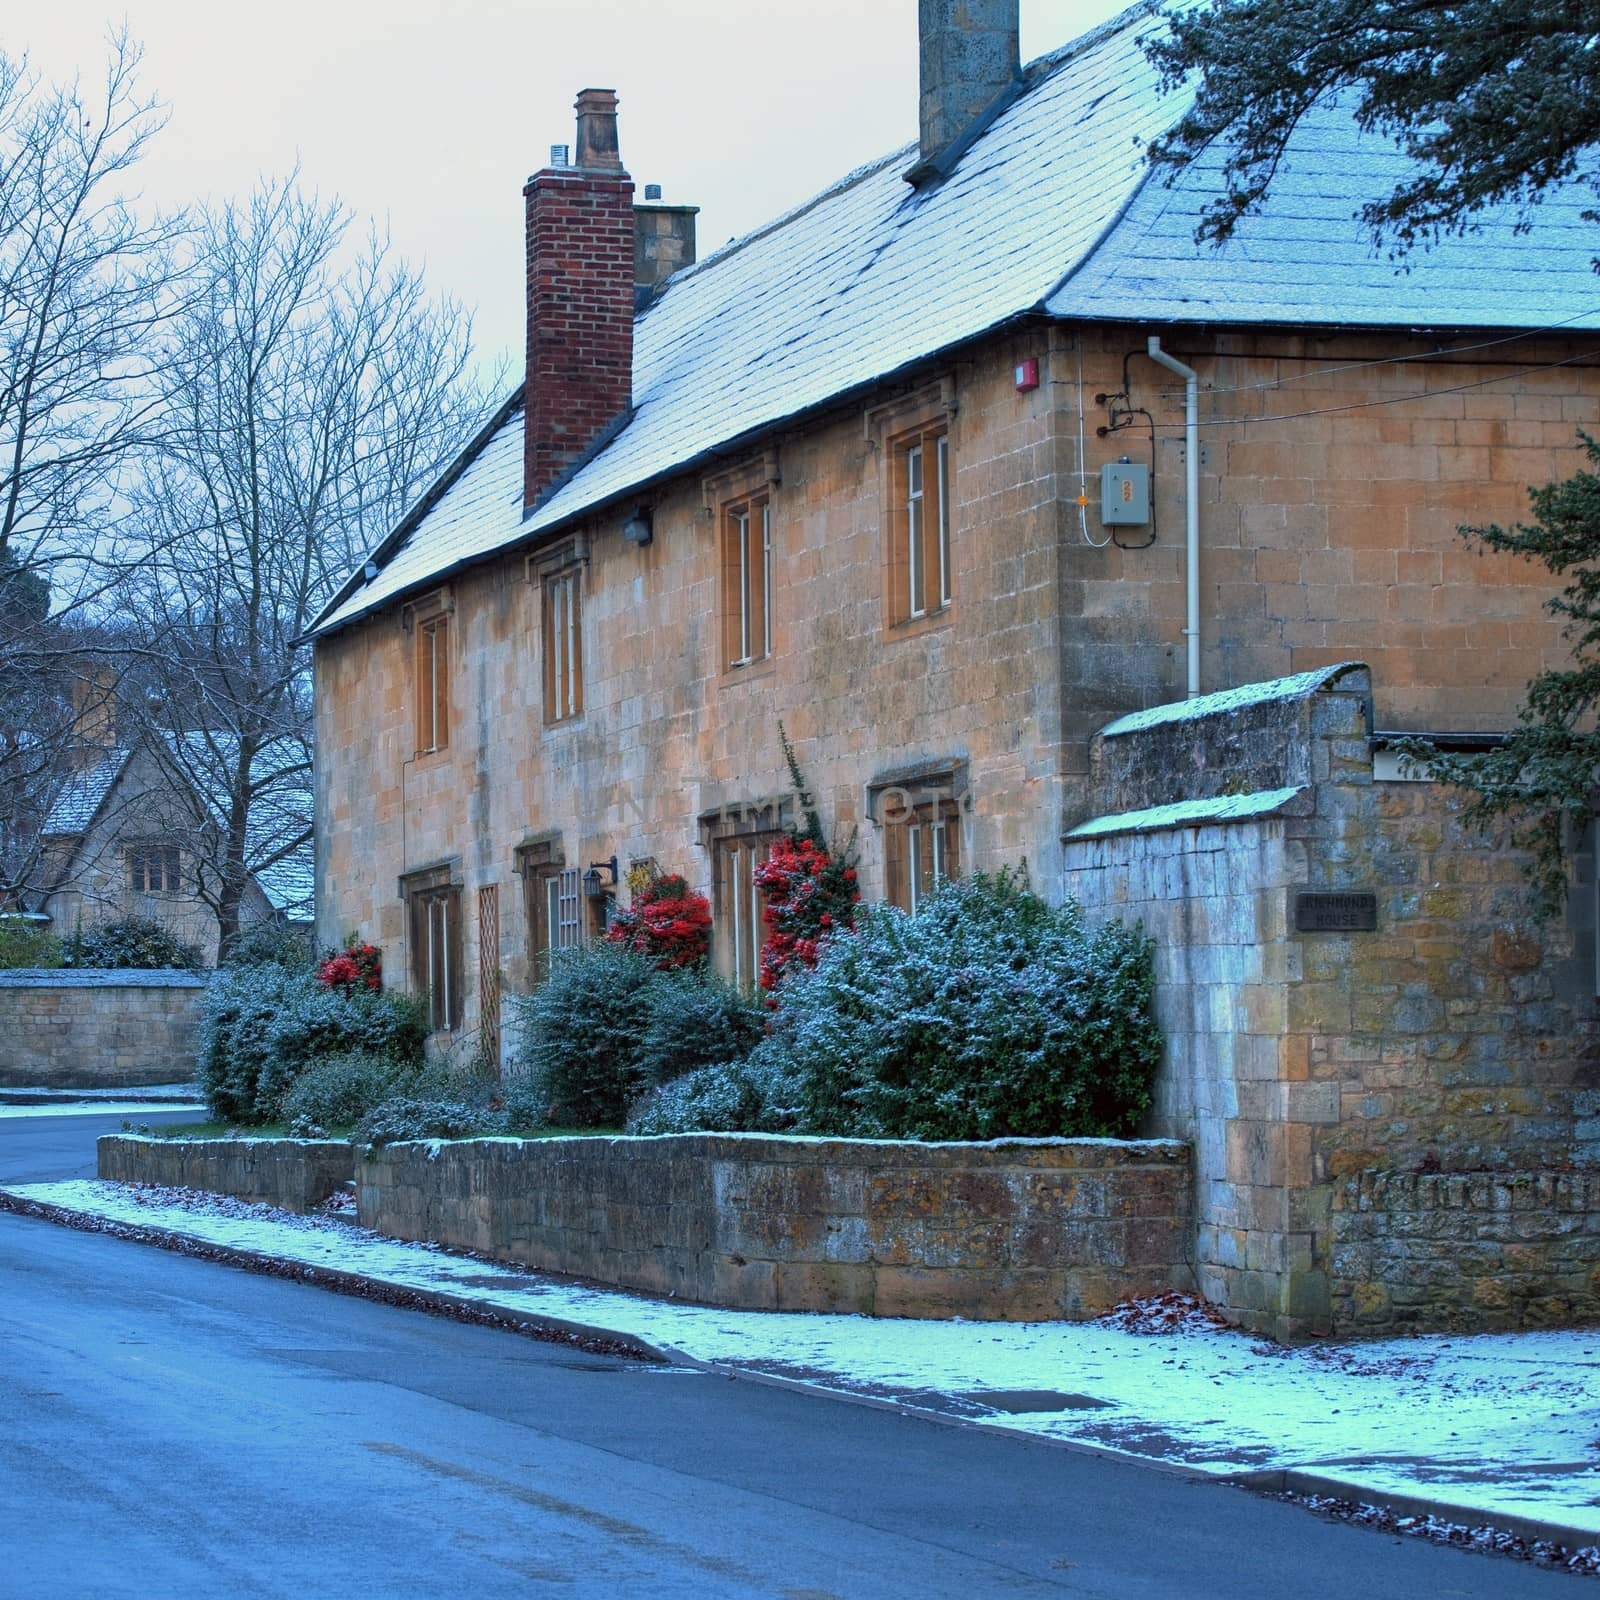 Terraced Cotswold stone cottages at Mickleton near Chipping Campden in winter, Gloucestershire, England.